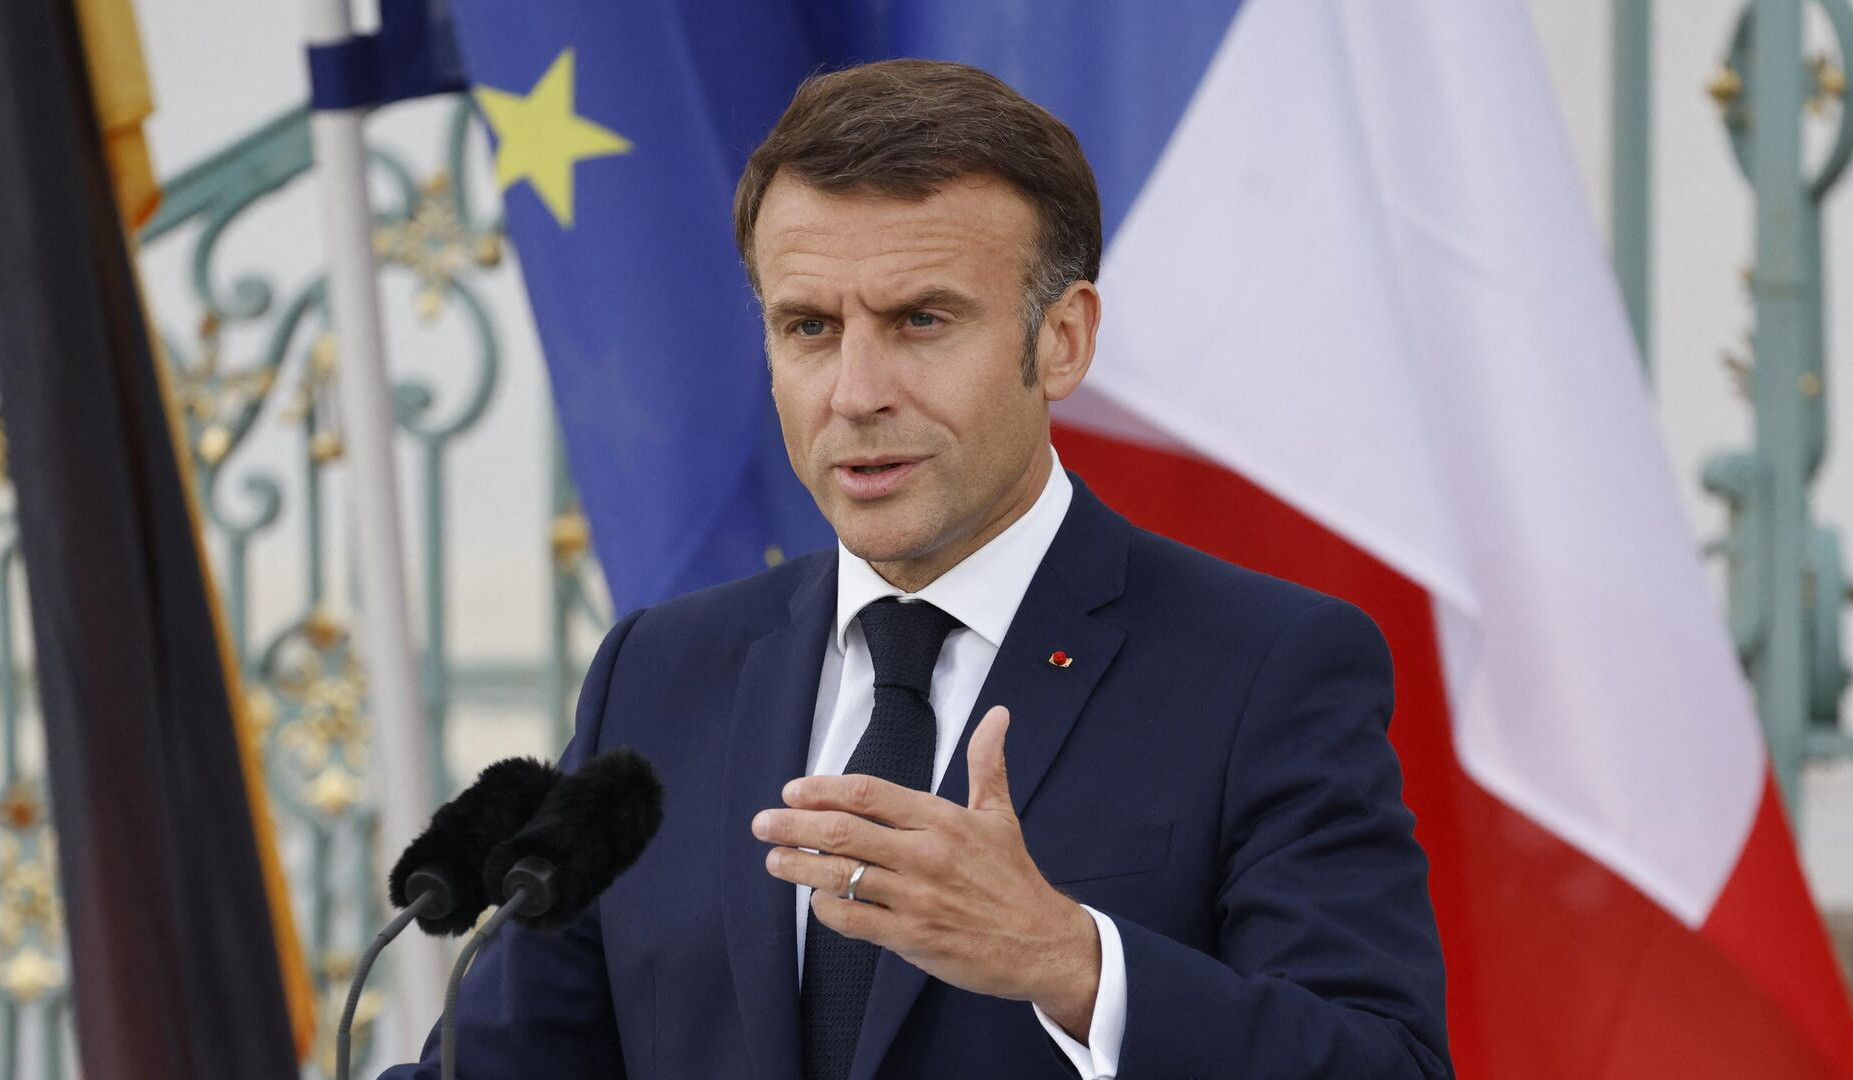 Macron announces he will not resign regardless of parliamentary election results